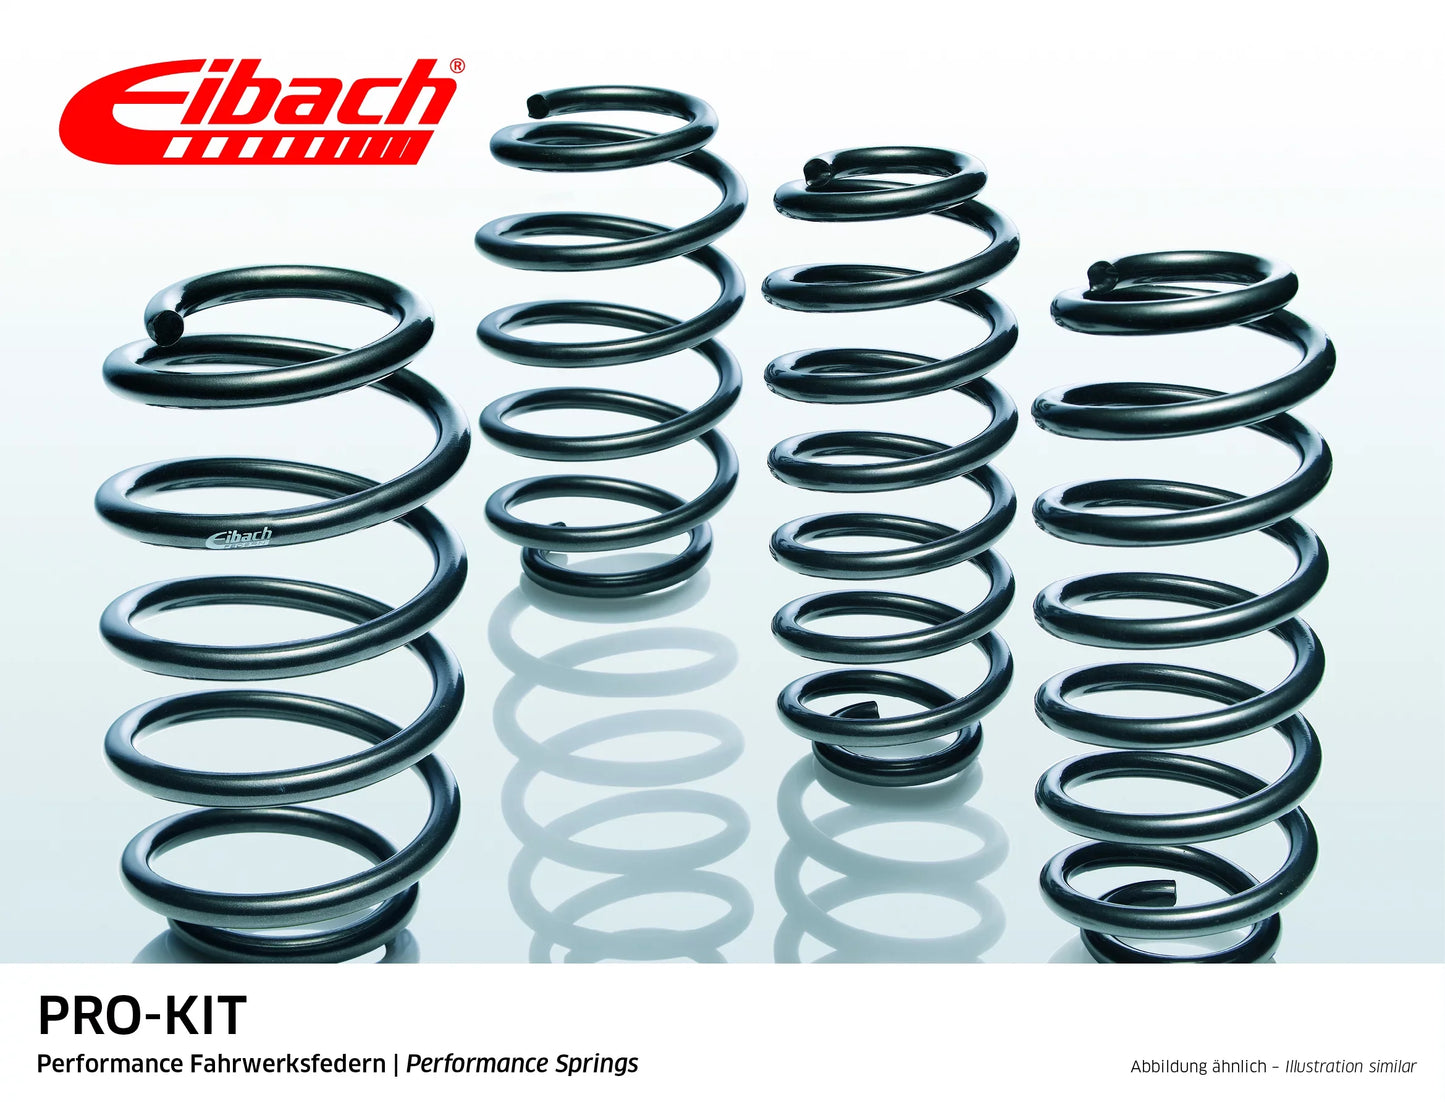 Eibach Pro-Kit Lowering Springs (E10-15-007-03-22) at £227.44